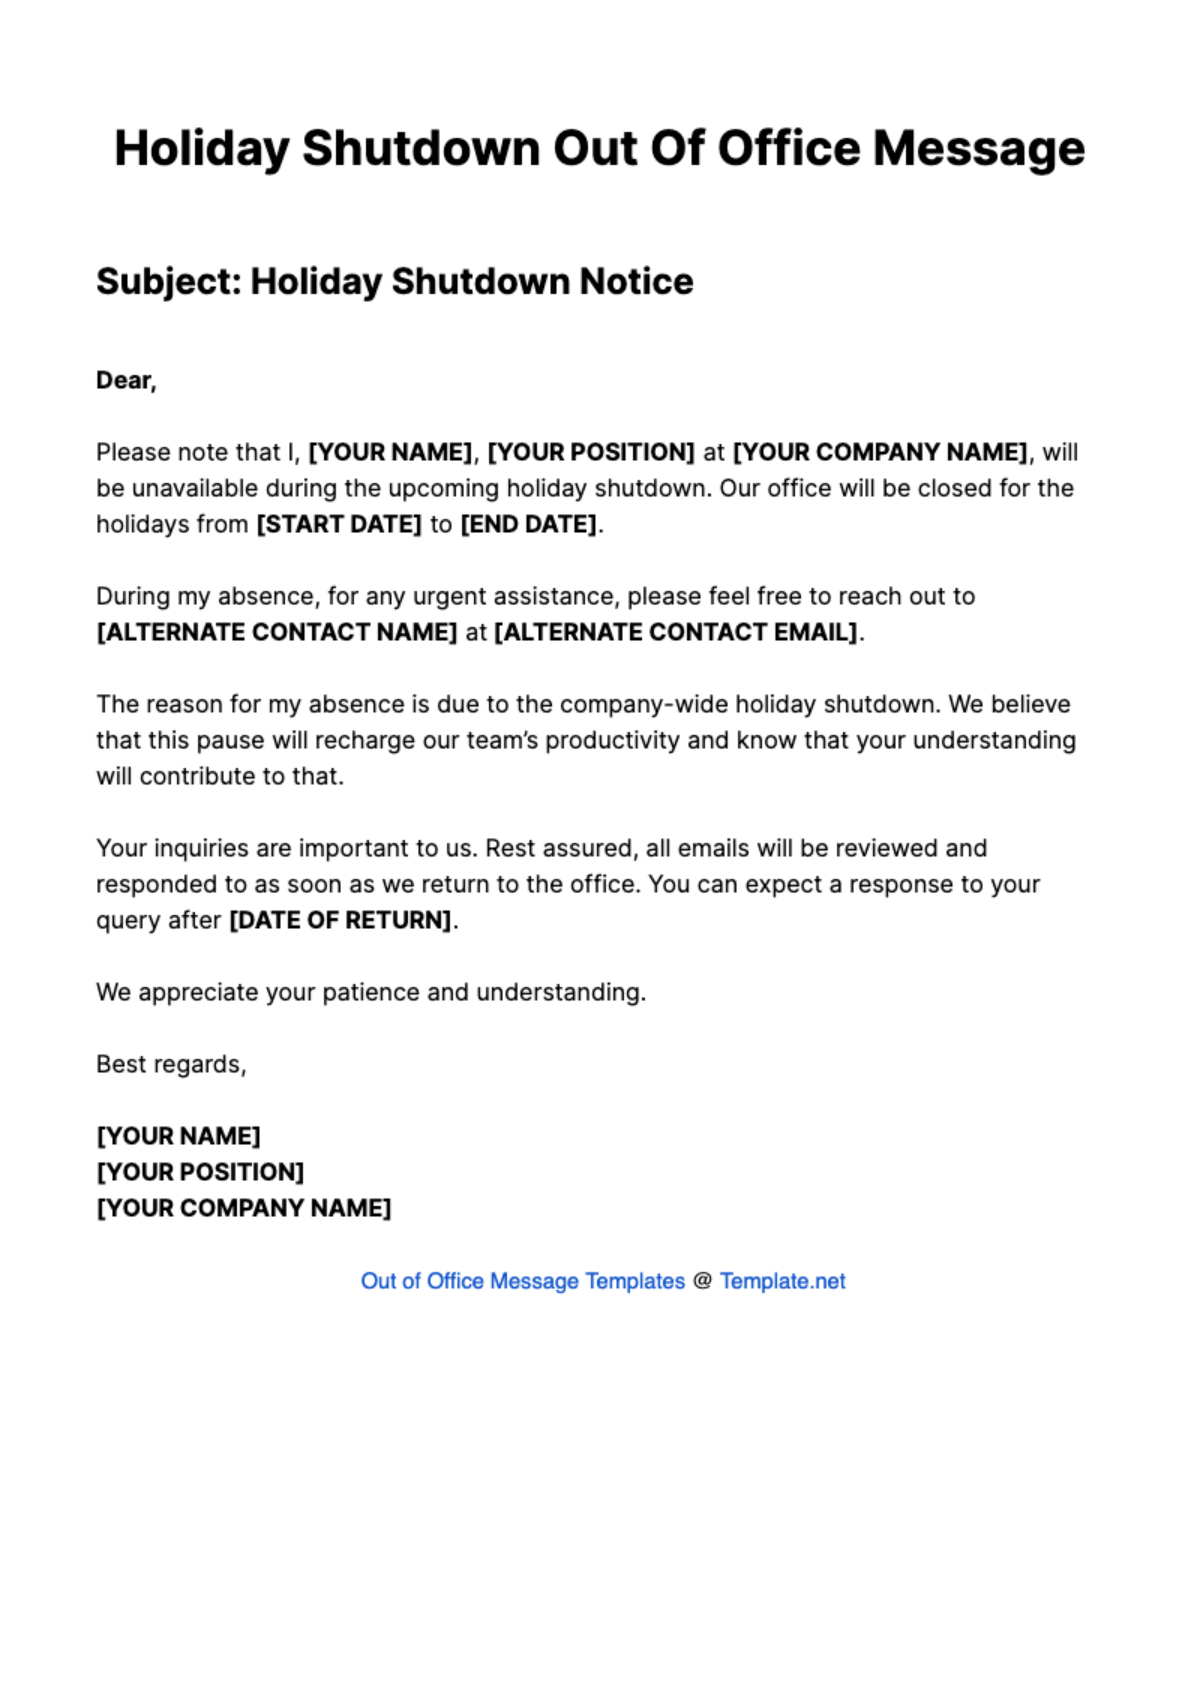 Holiday Shutdown Out Of Office Message Template